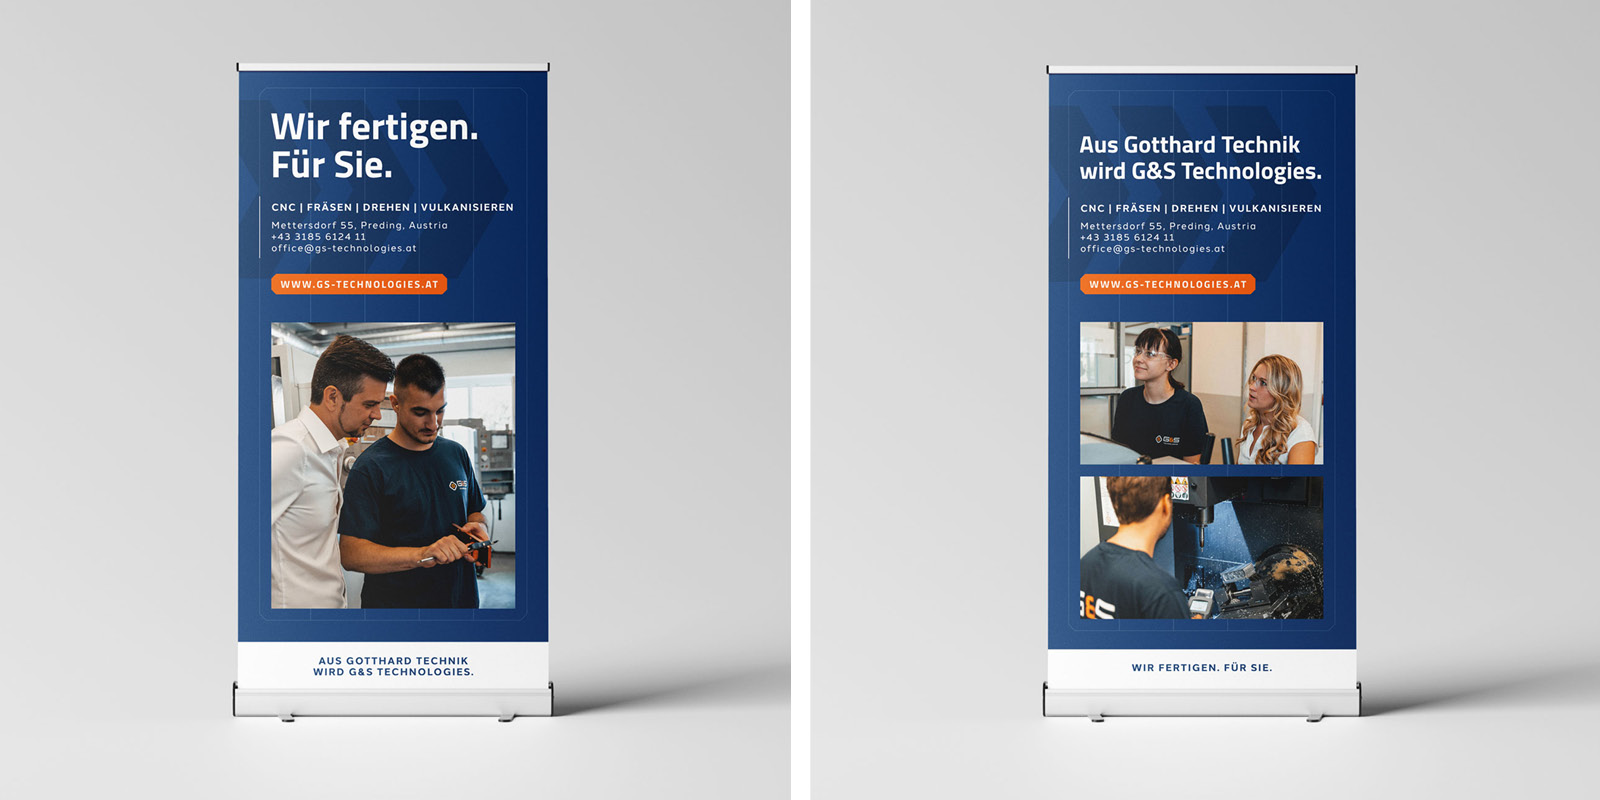 Two images of a roll up banner for a company.